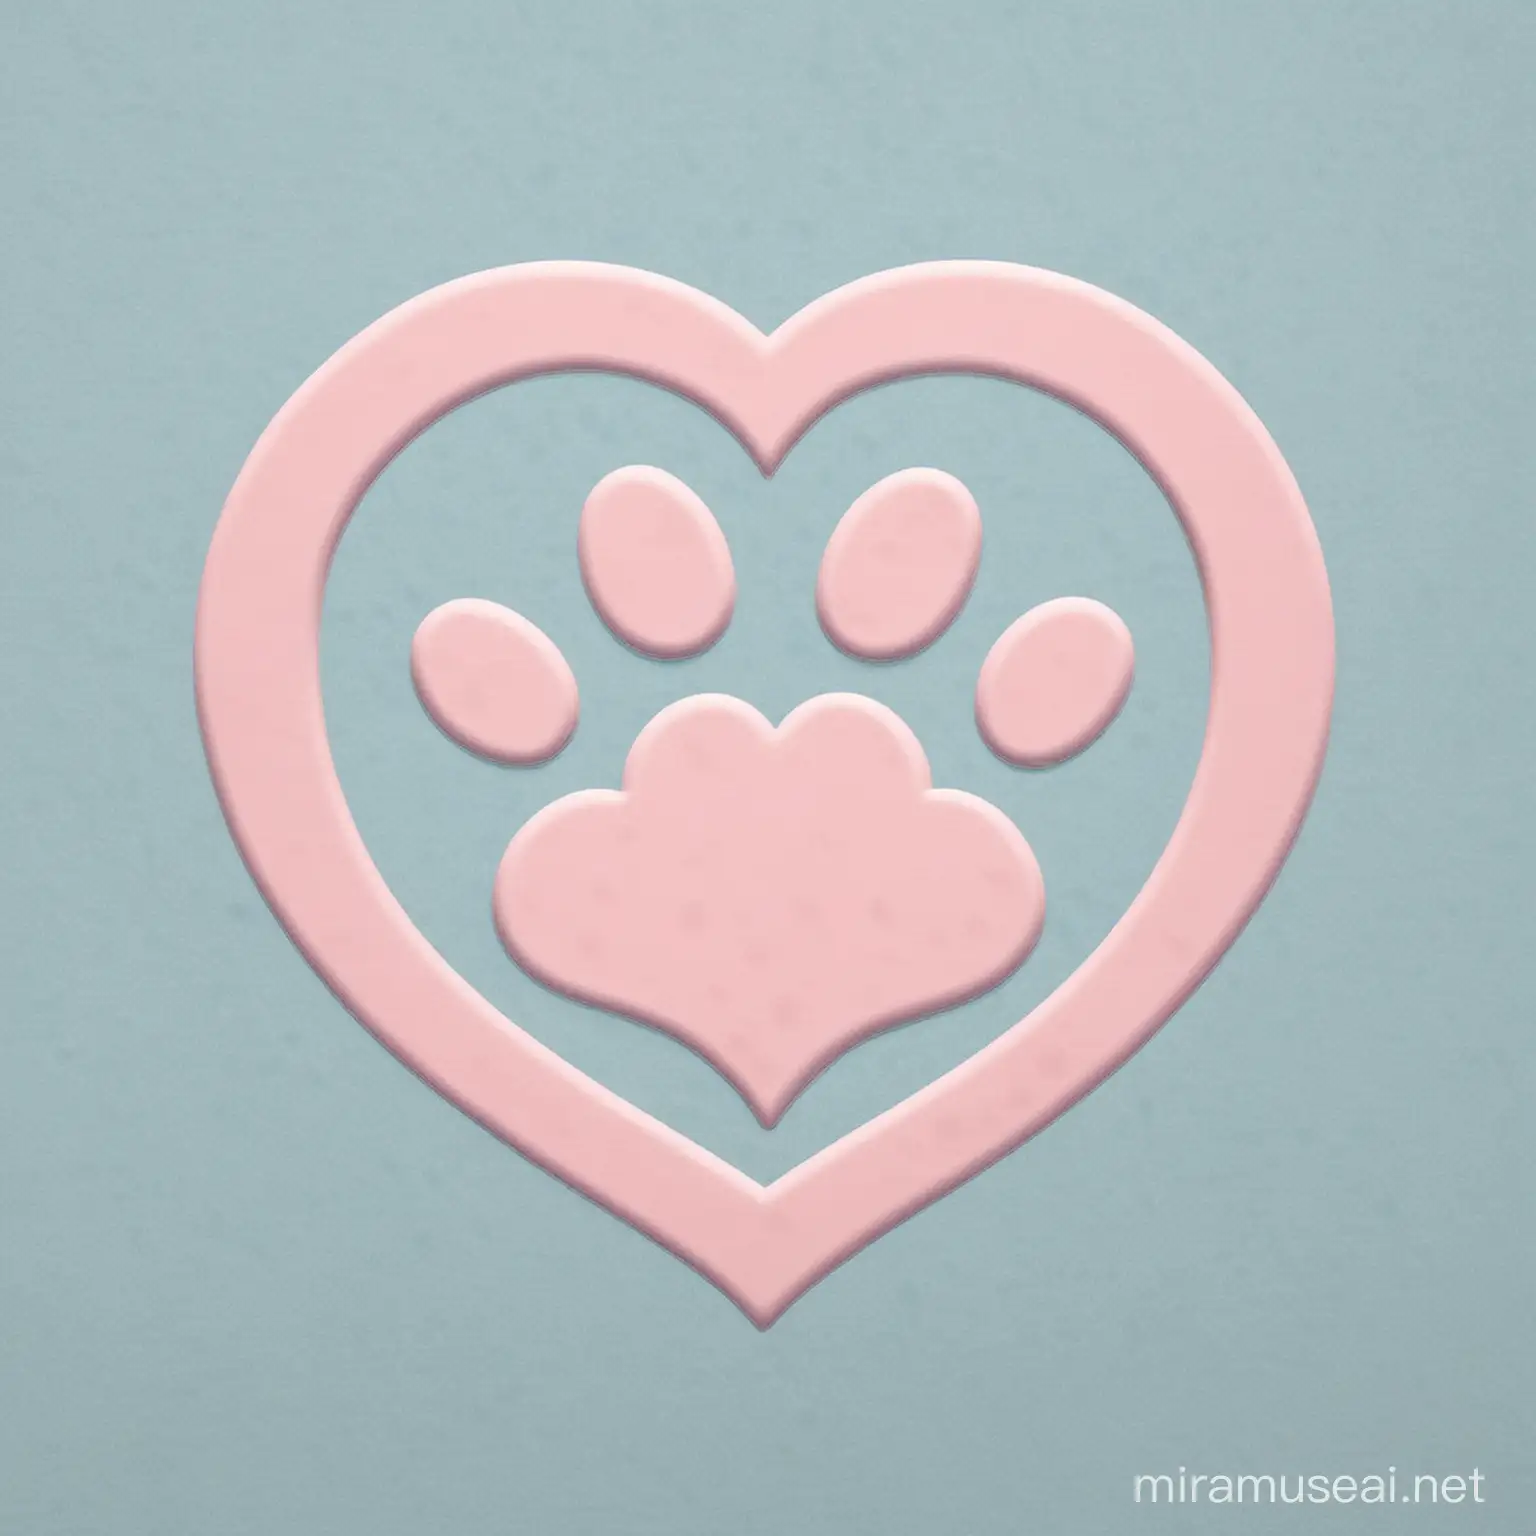 Friendly Animal Paw Logo with Heart Emblem for PetParadise